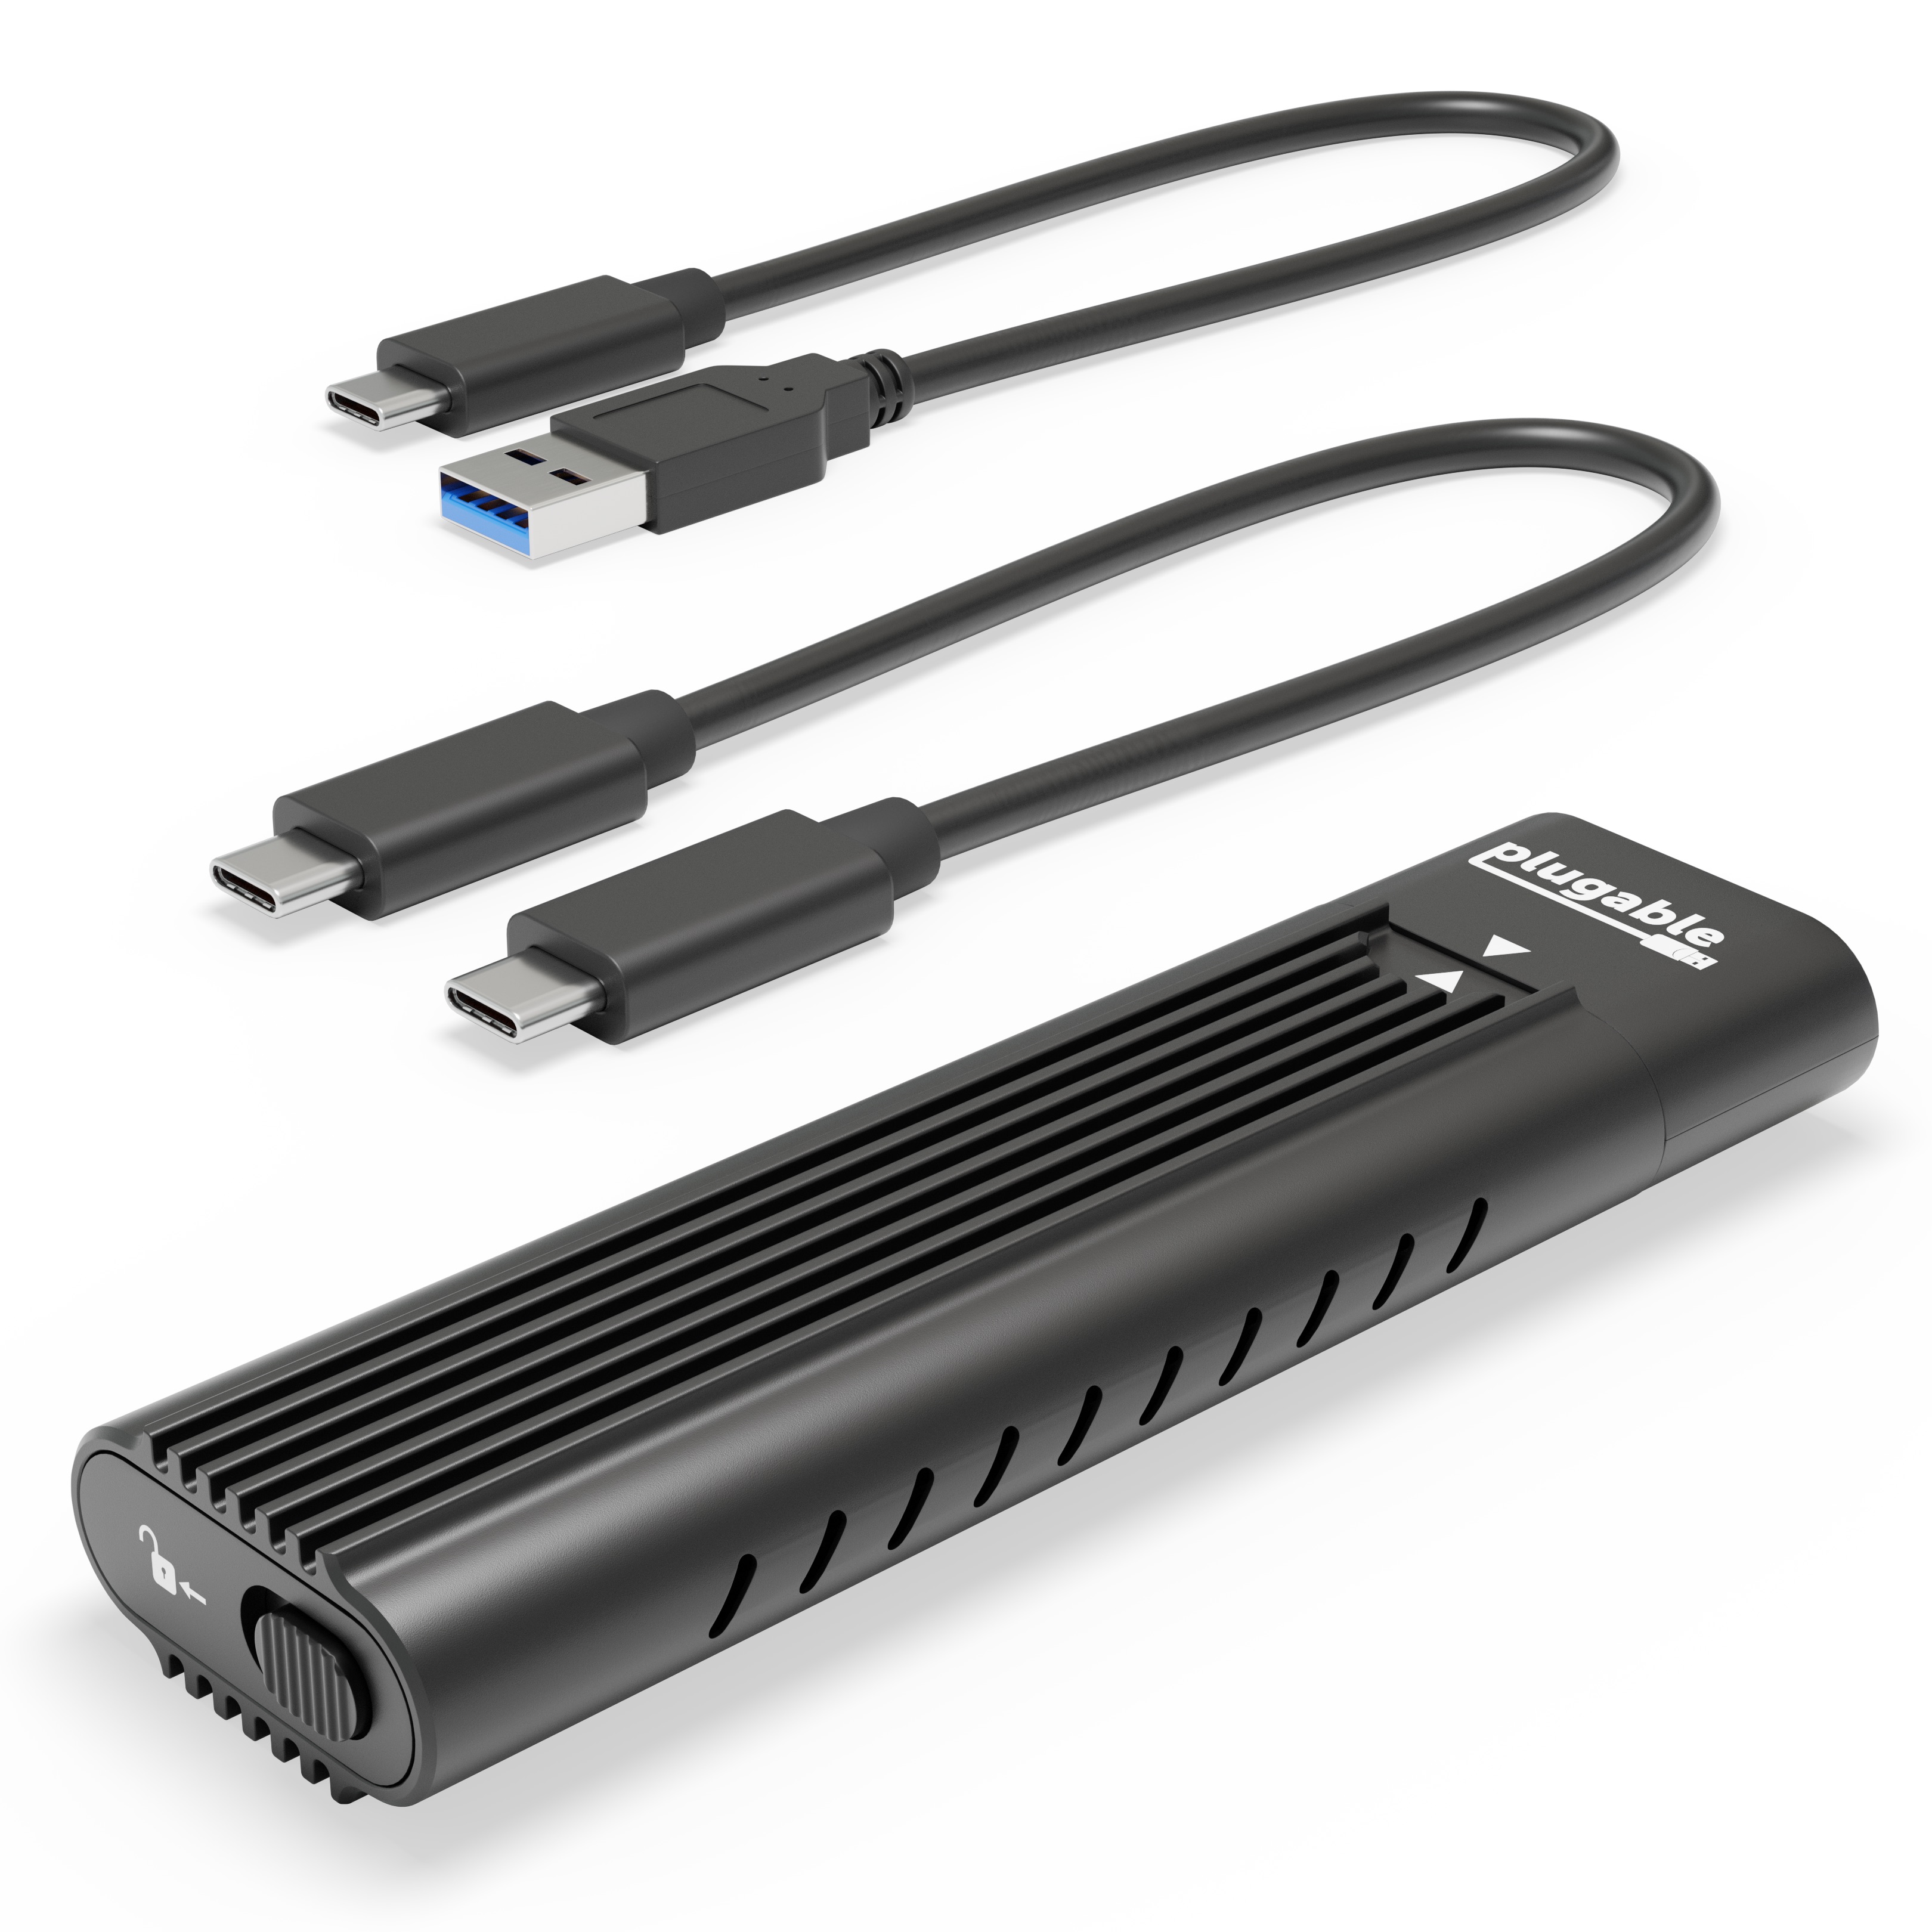 Plugable USB C to M.2 NVMe Tool-free Enclosure USB C and Thunderbolt 3 Compatible up to USB 3.1 Gen 2 Speeds (10Gbps). Adapter Includes USB-C and USB 3.0 Cables (Supports M.2 NVMe SSDs 2280 2260 2242) - image 1 of 8